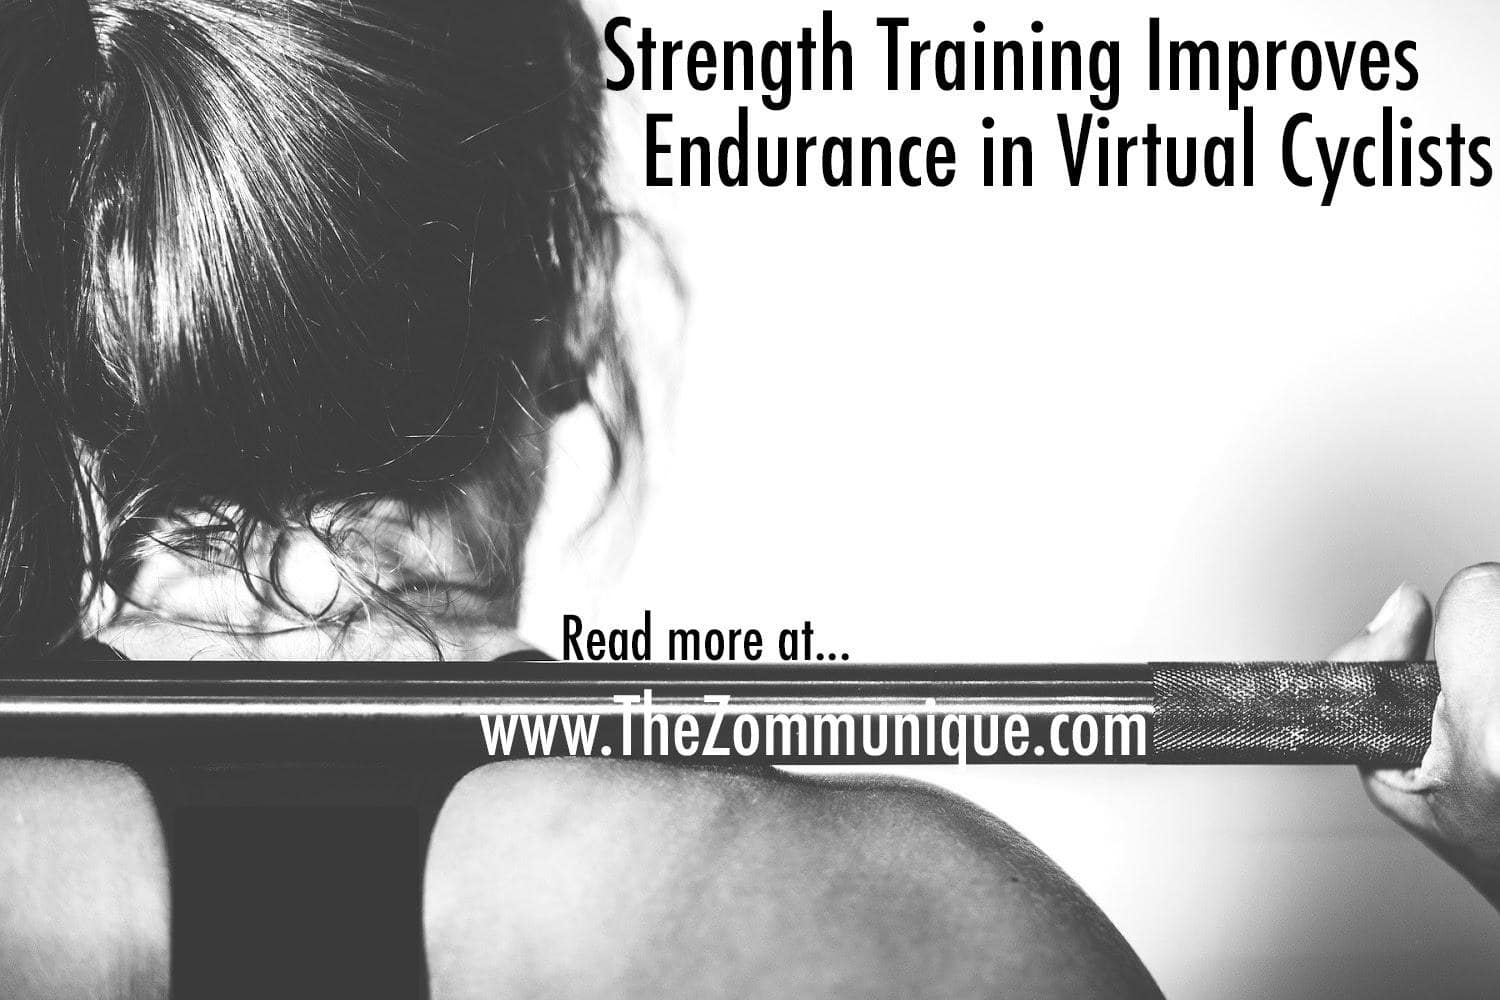 Strength training improves endurance for cyclists image